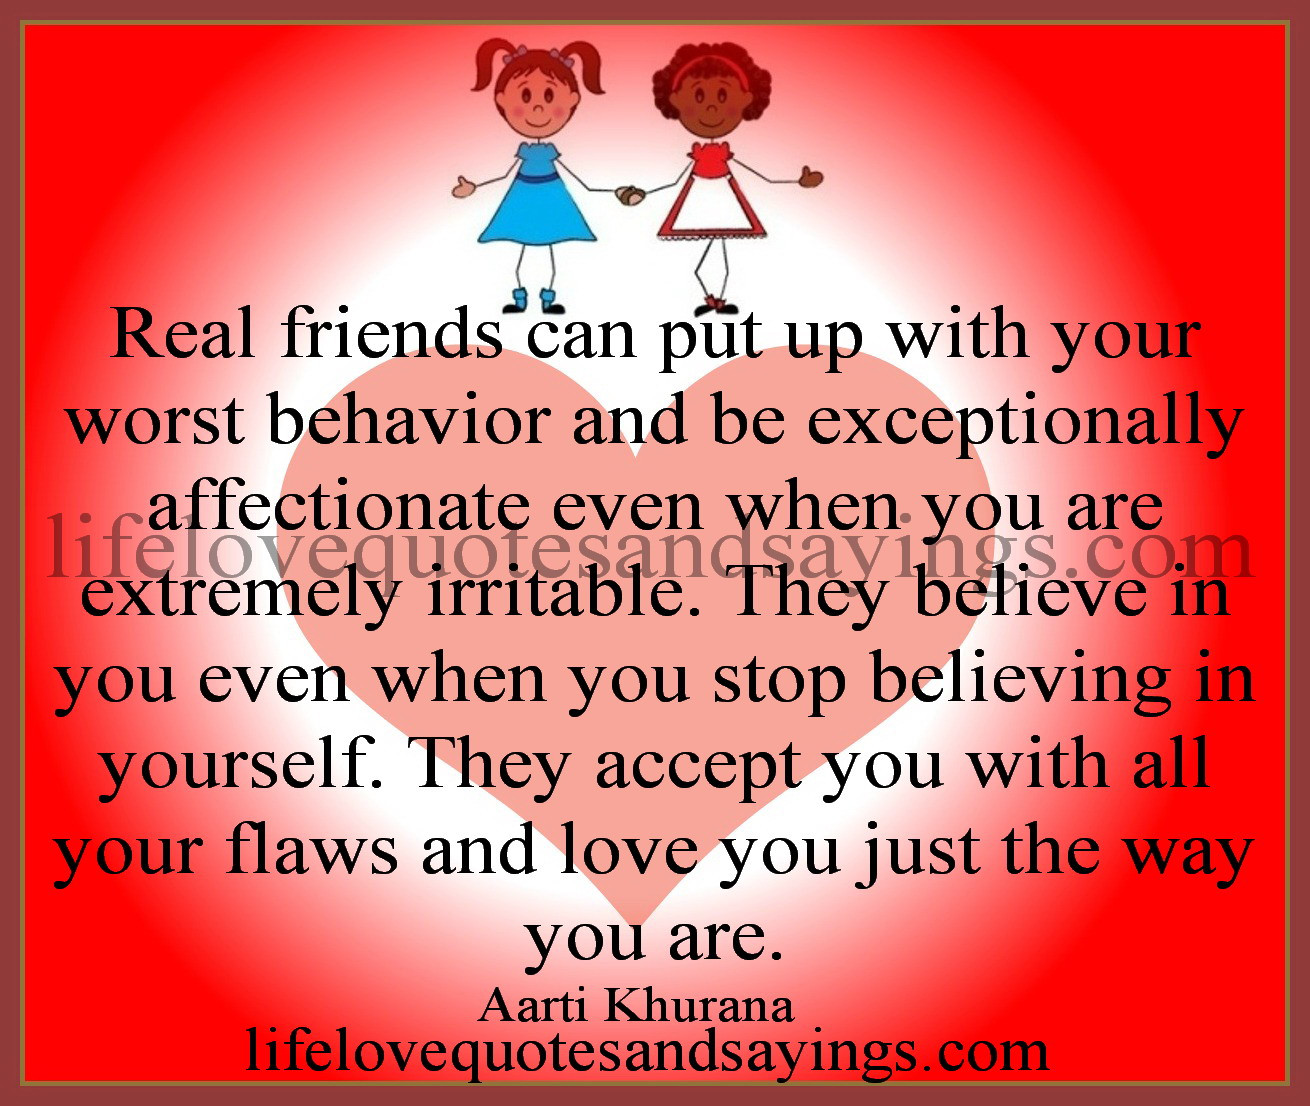 Quotes About Friendship And Love
 Thanks For Your Friendship Quotes QuotesGram